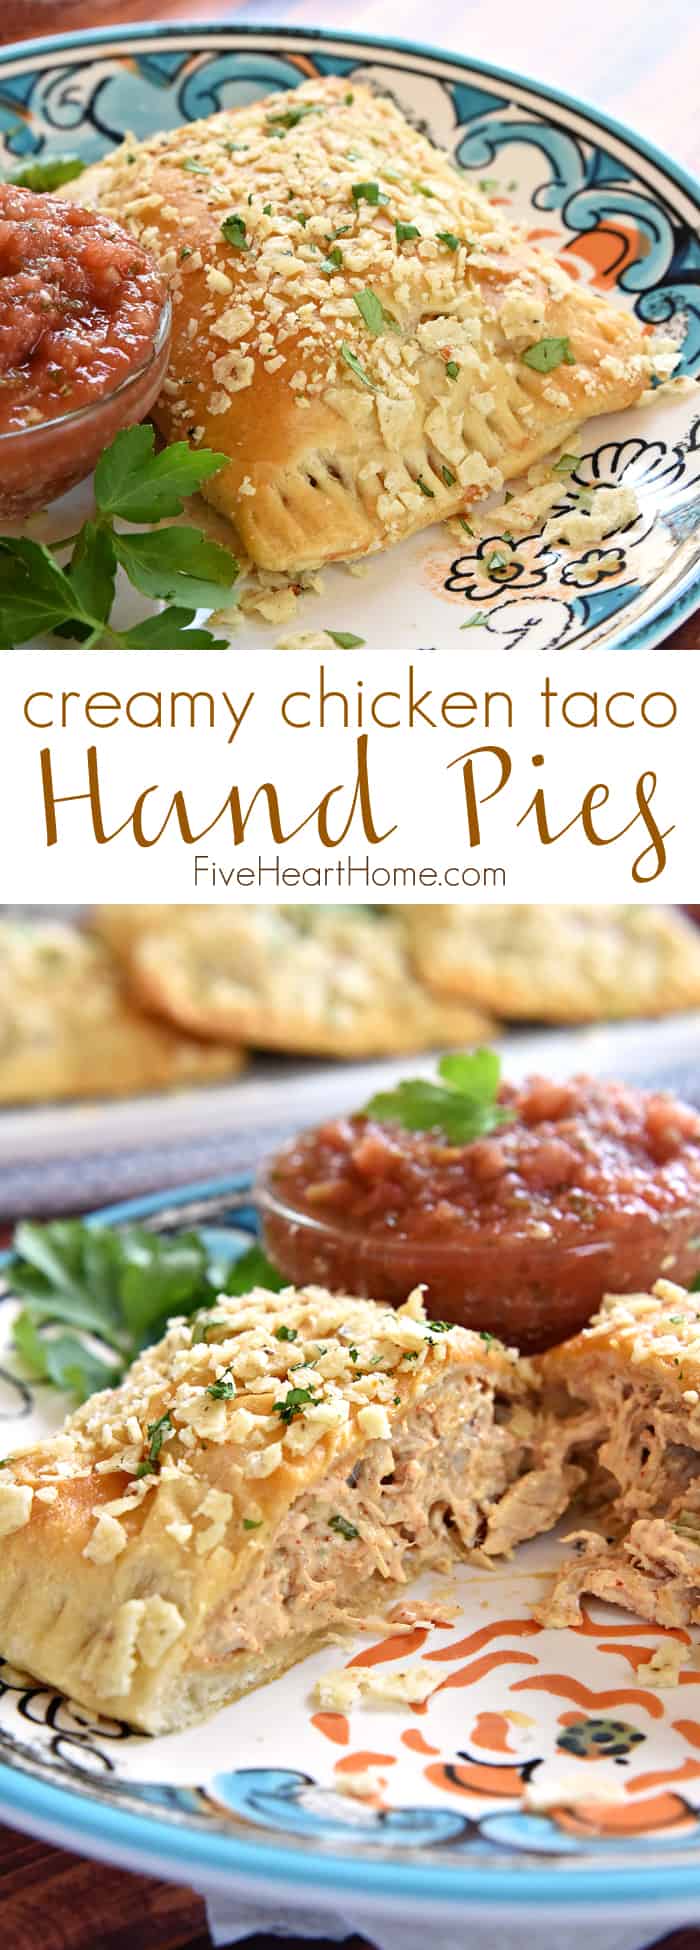 Creamy Chicken Taco Hand Pies ~ crescent roll dough filled with a savory mixture of diced chicken, cream cheese, taco seasoning, and fresh cilantro, and topped with a crunchy layer of crushed tortilla chips | FiveHeartHome.com via @fivehearthome